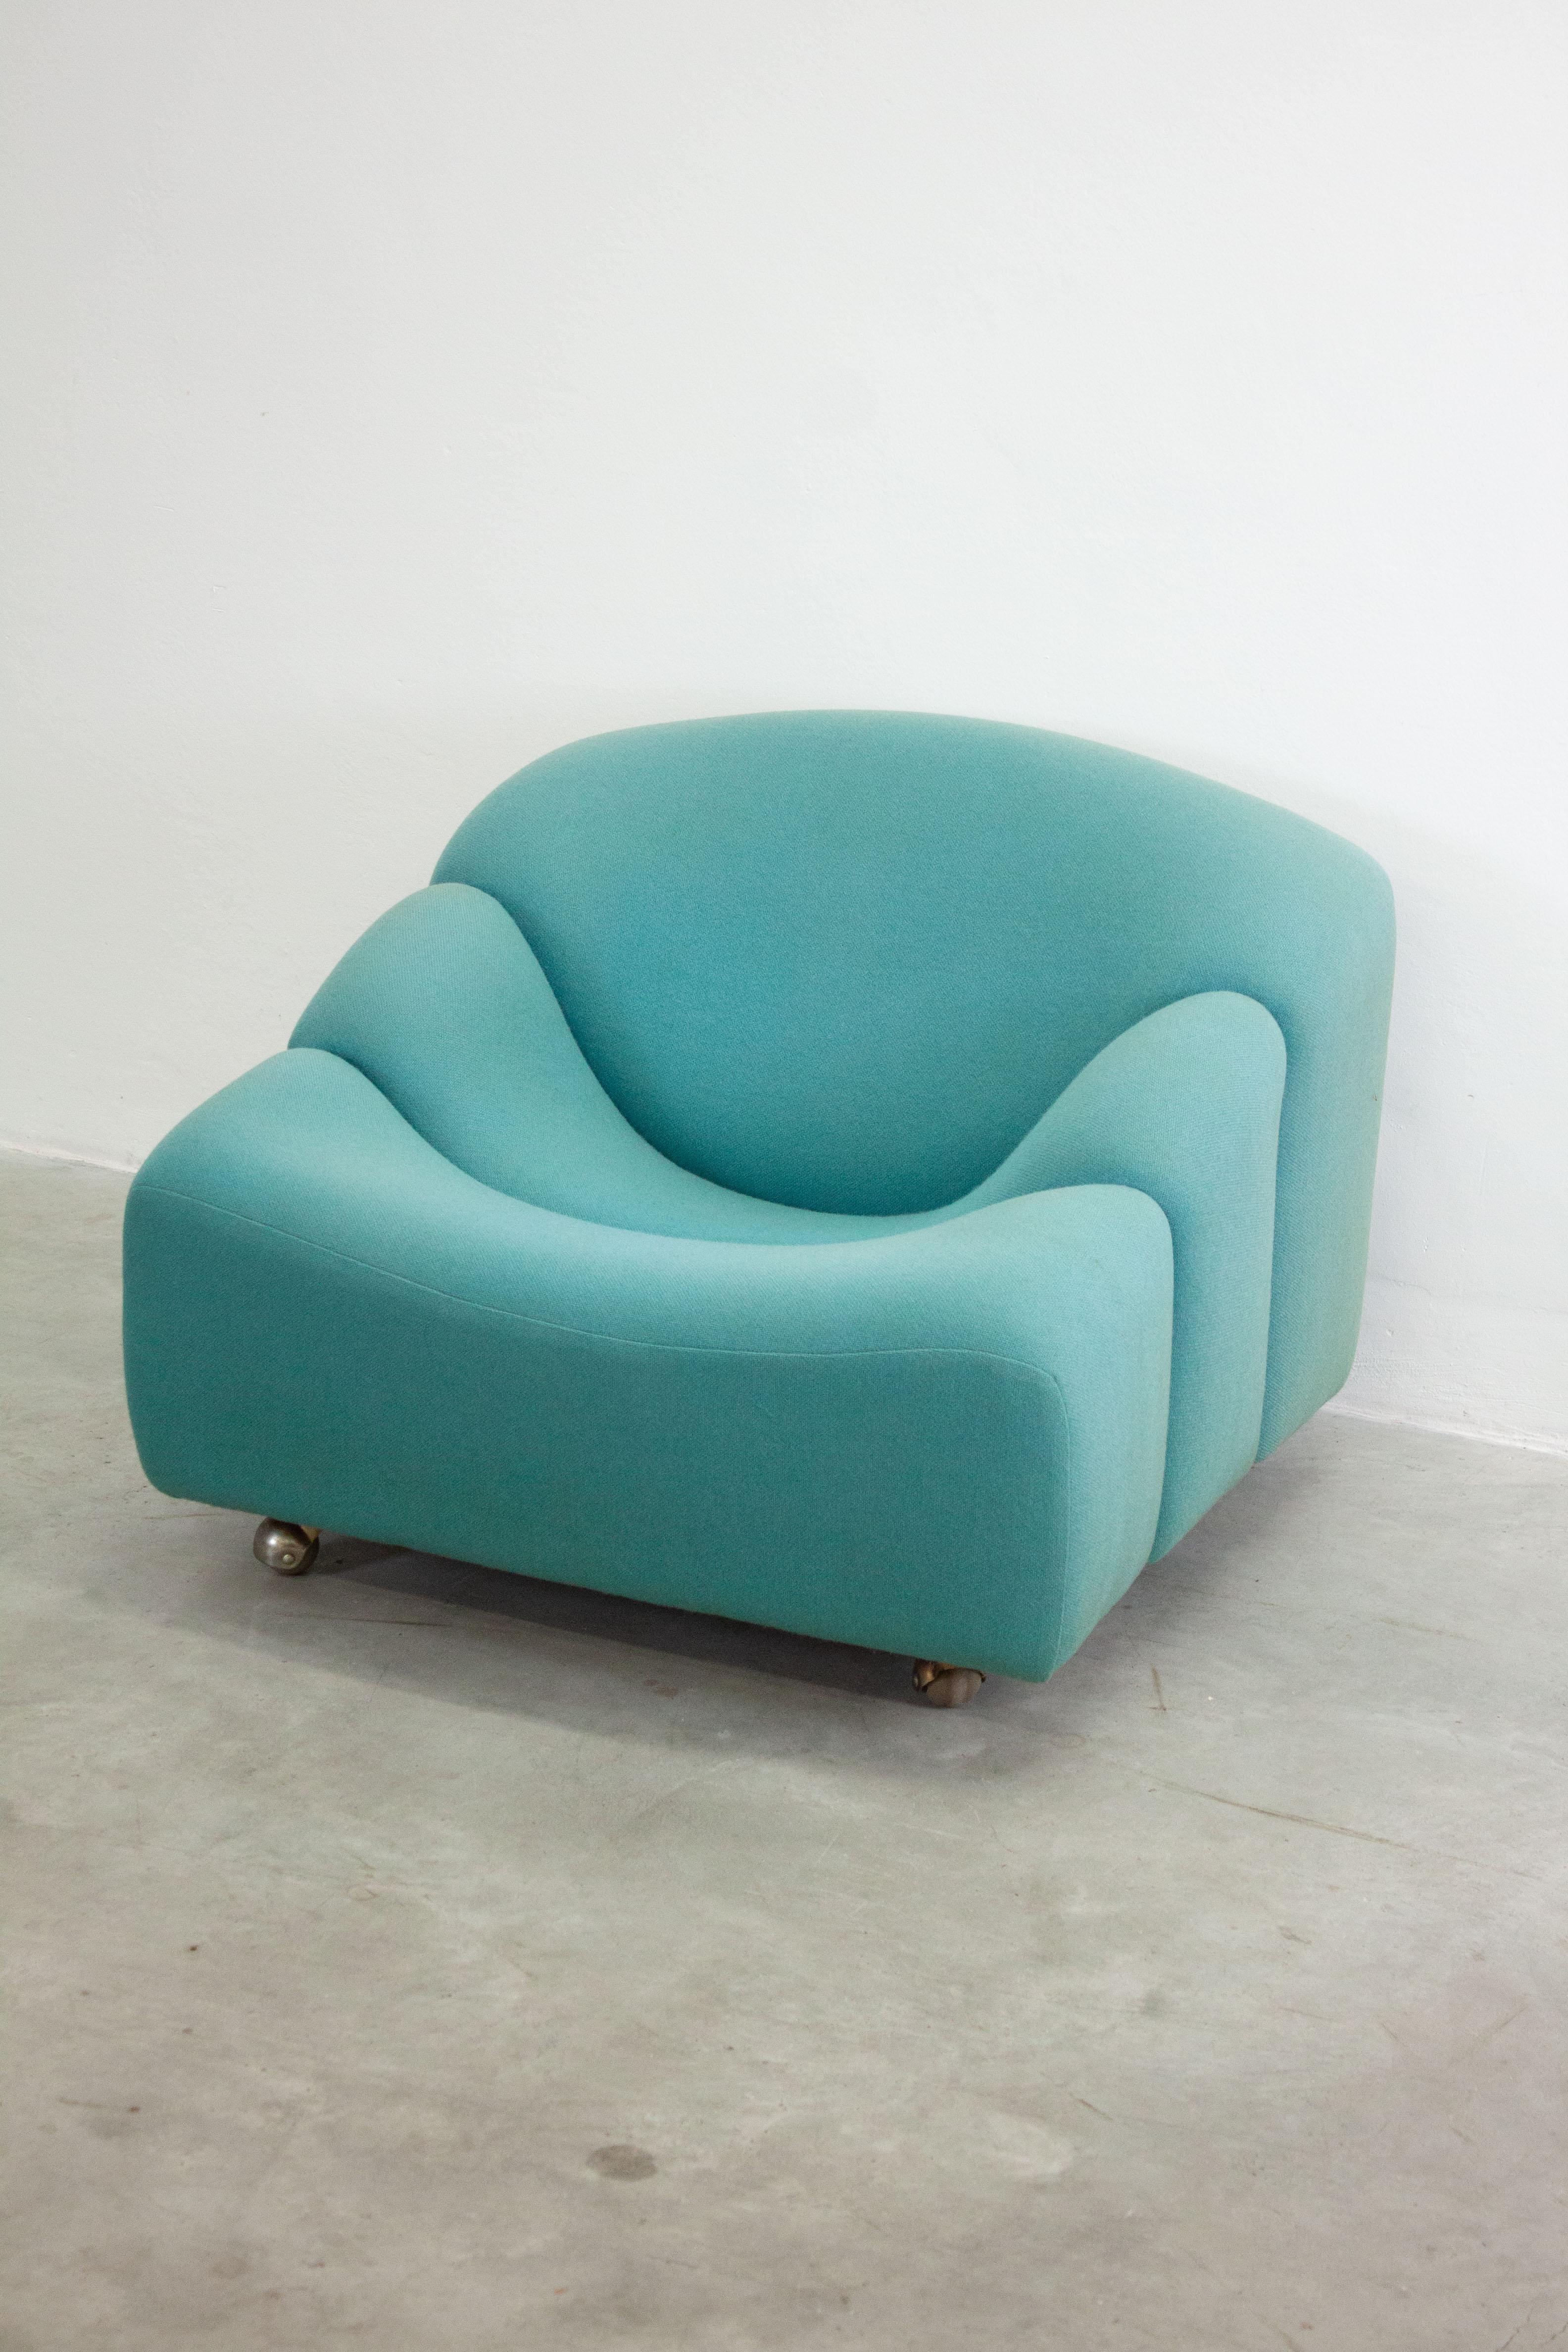 Mid-Century Modern Artifort ABCD Lounge Chair by Pierre Paulin (Teal) For Sale